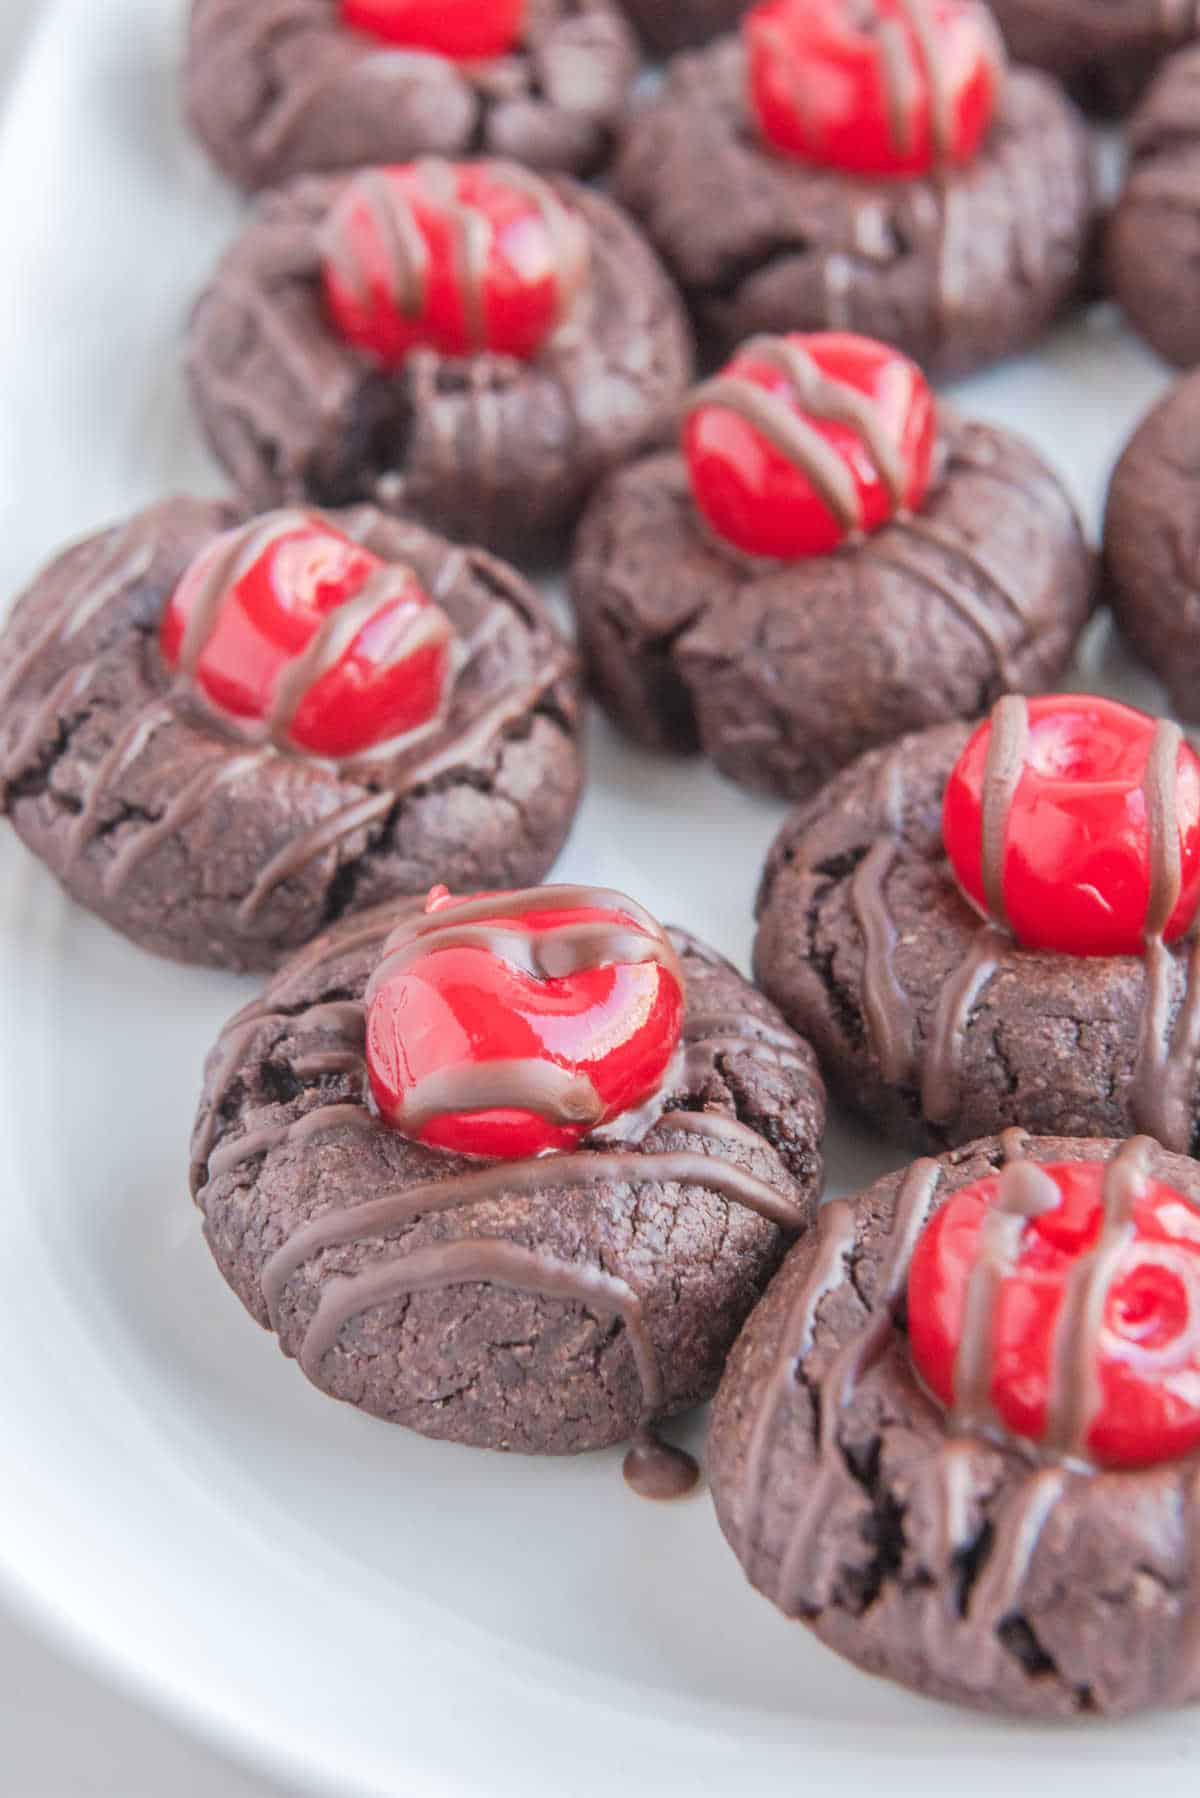 Chocolate cherry cookies on a plate.